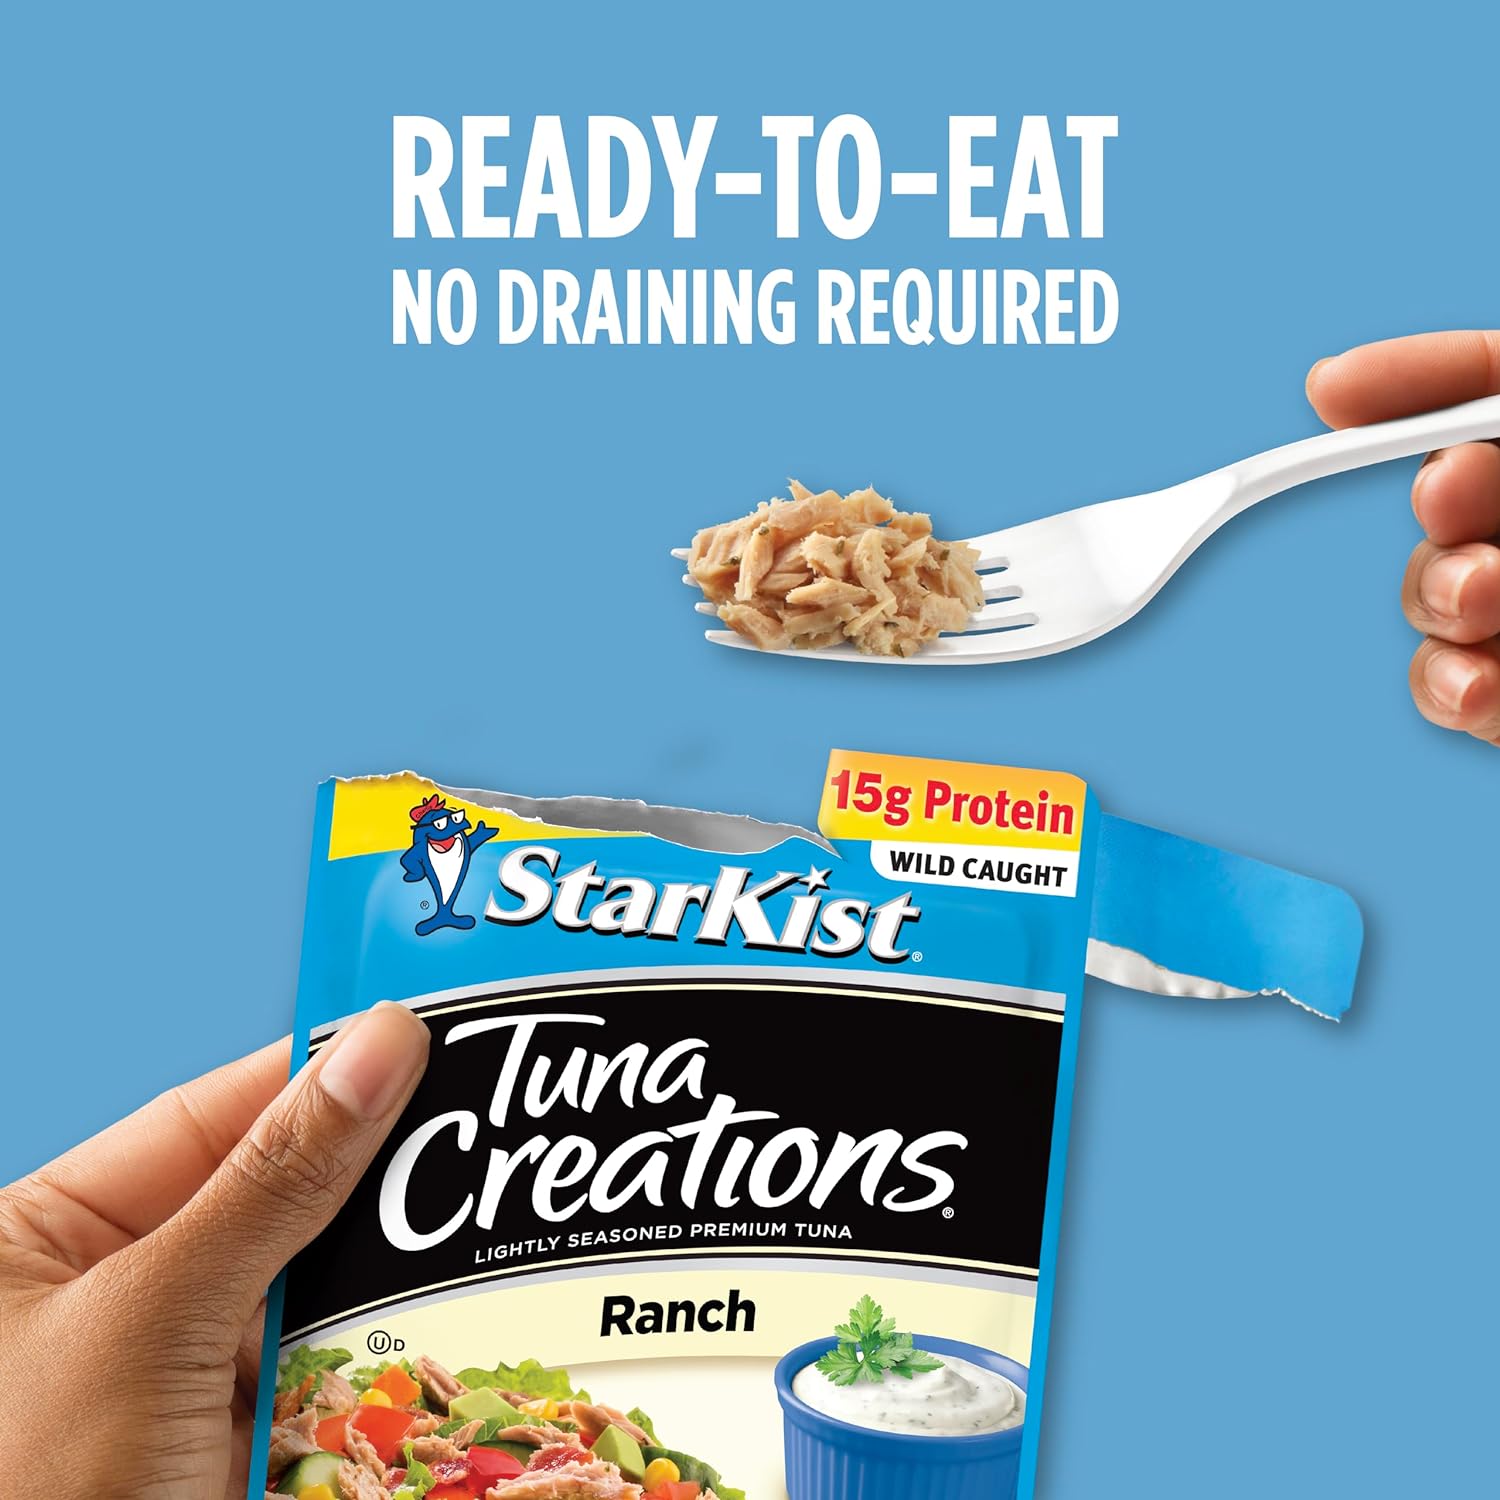 StarKist Tuna Creations Ranch, 2.6 oz pouch (Pack of 12) (Packaging May Vary) : StarKist: Grocery & Gourmet Food